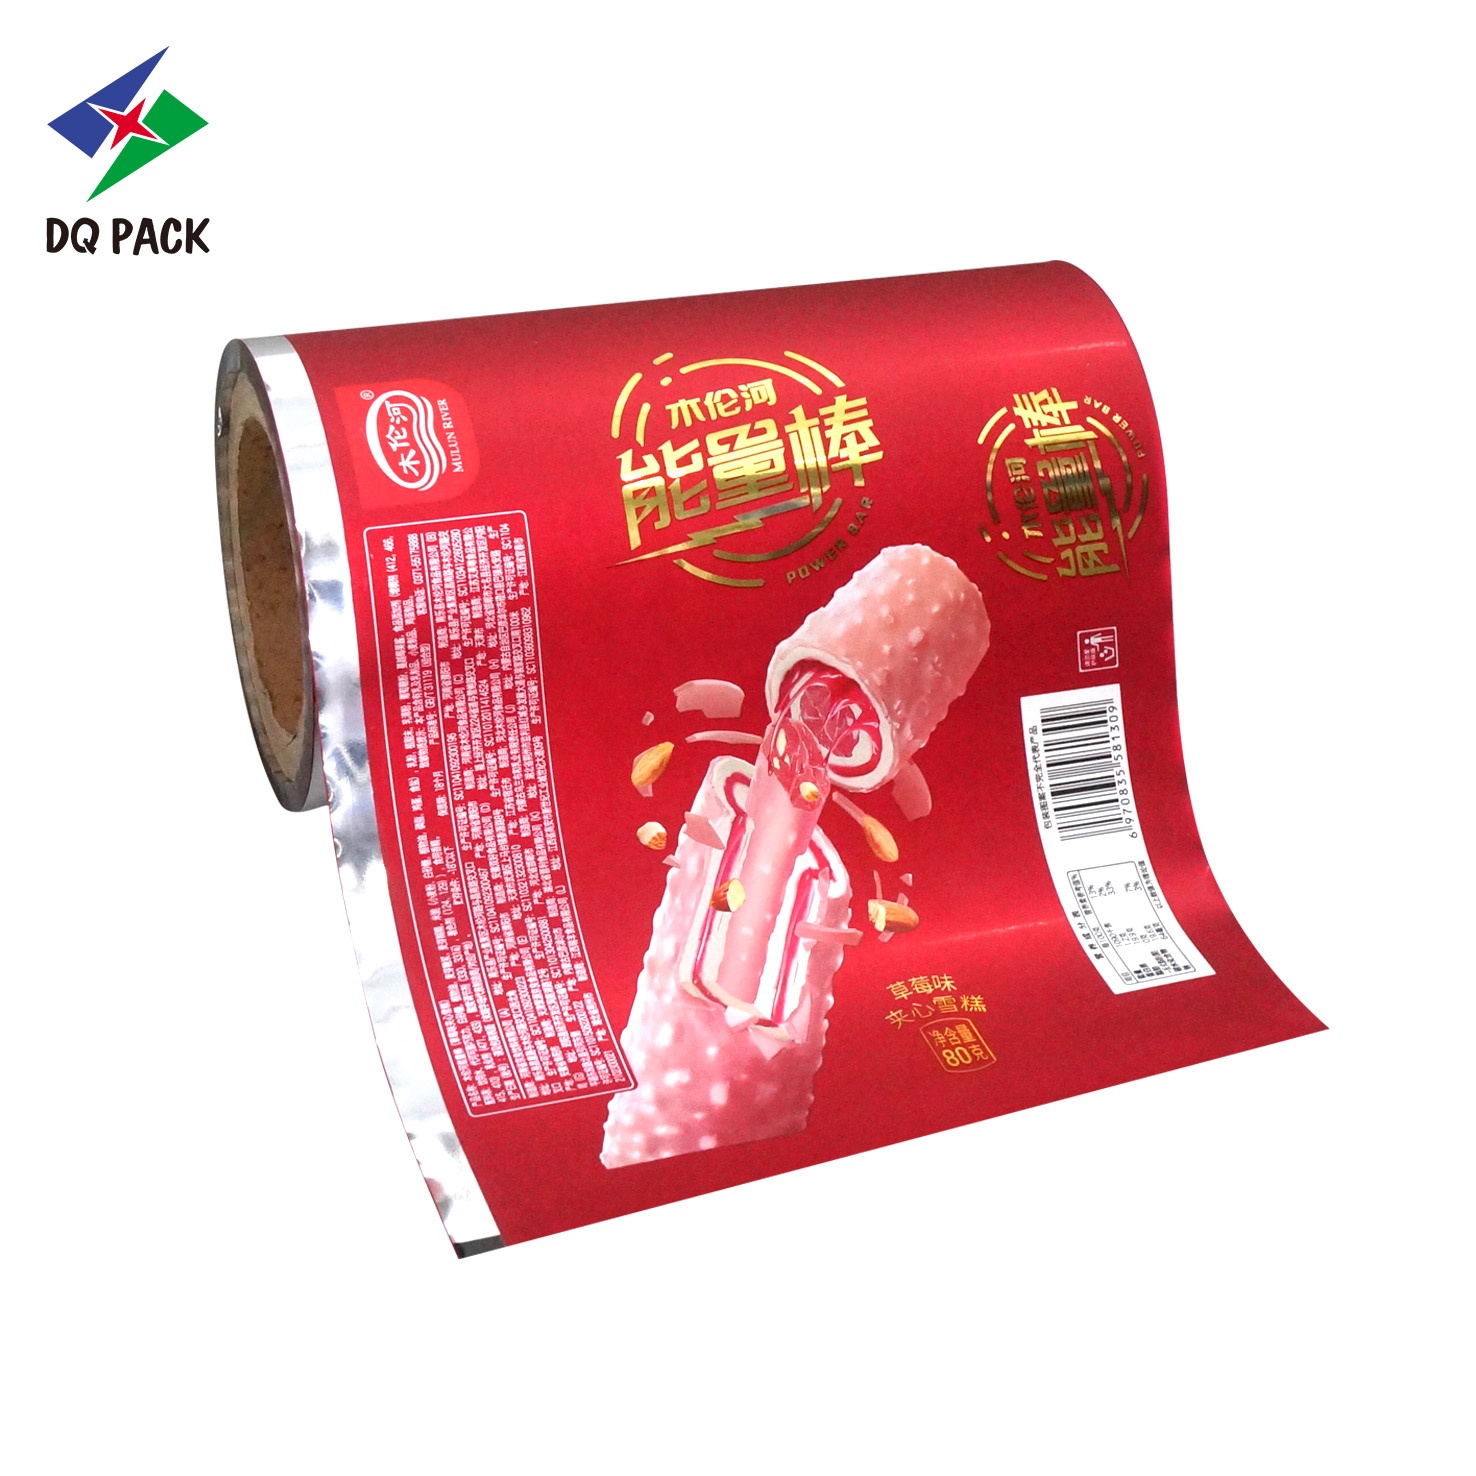 DQ PACK Metallized Film Custom Printed Automatic Candy Snack Biscuit Potato Chips Coffee Packaging Roll Film